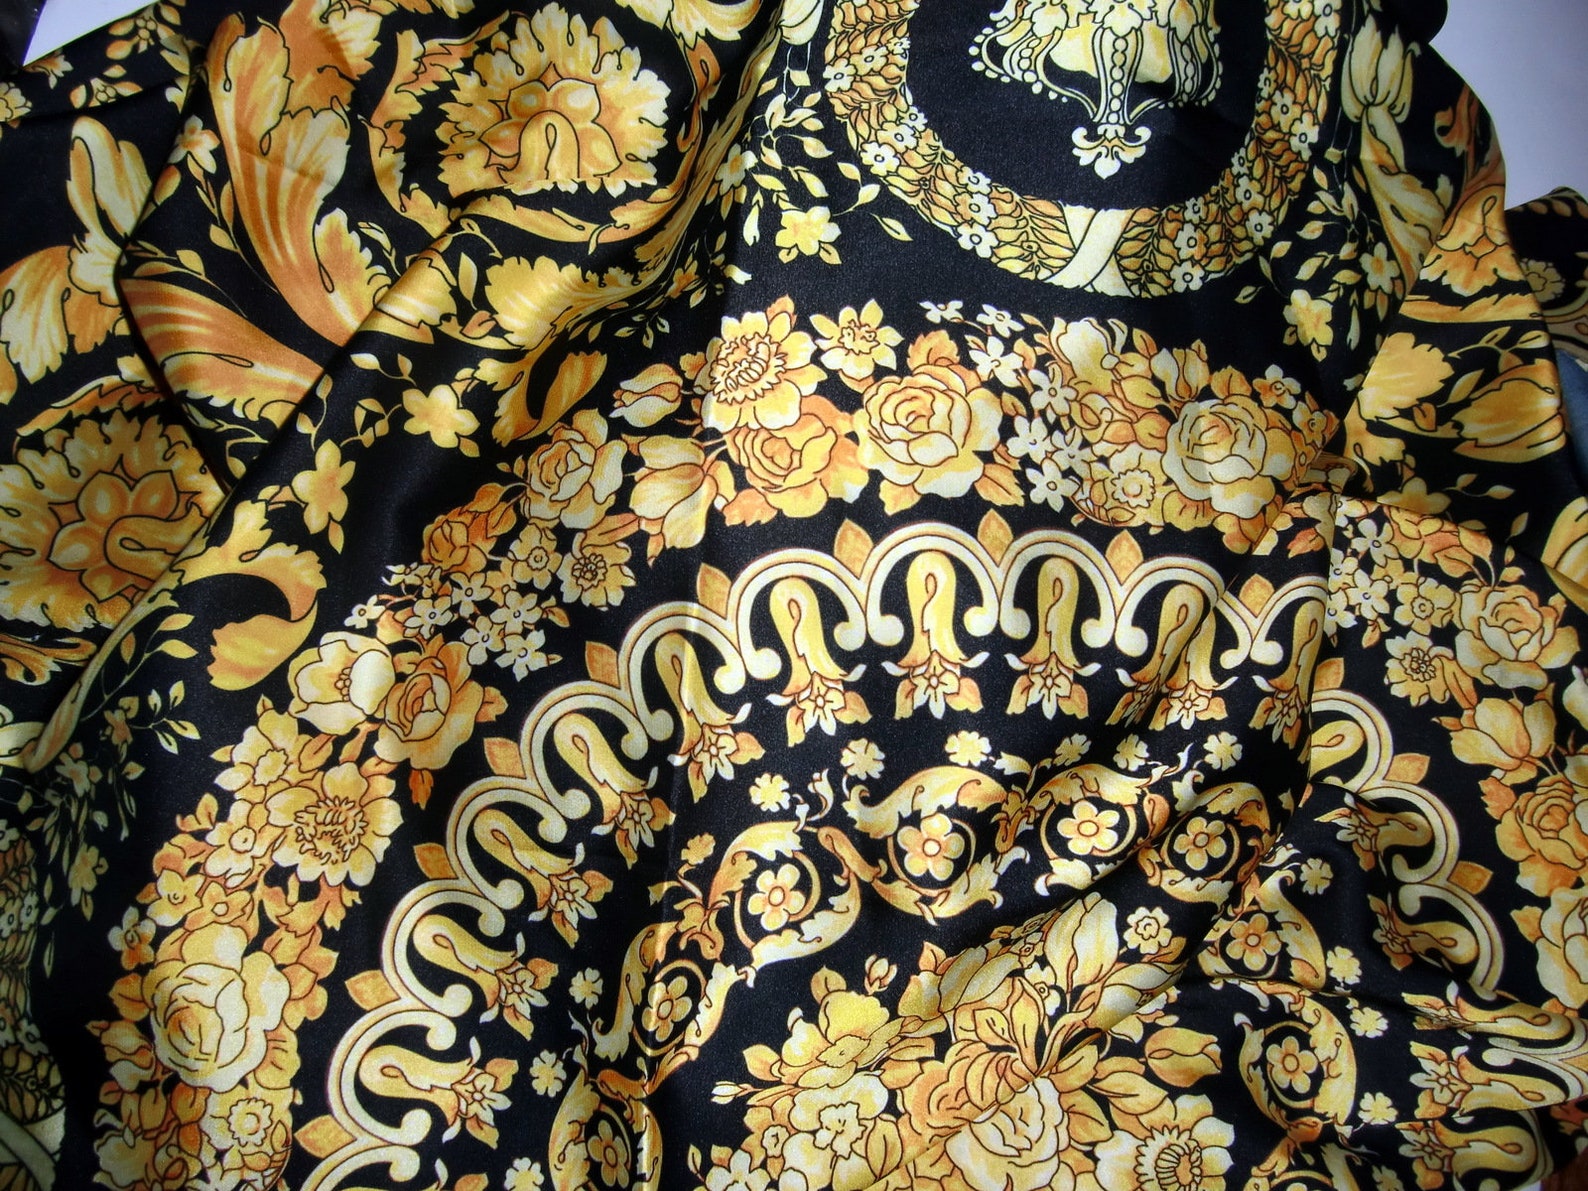 Versace Baroque Print Satin Fabric.2 Meters Long. Almost 1 And 028